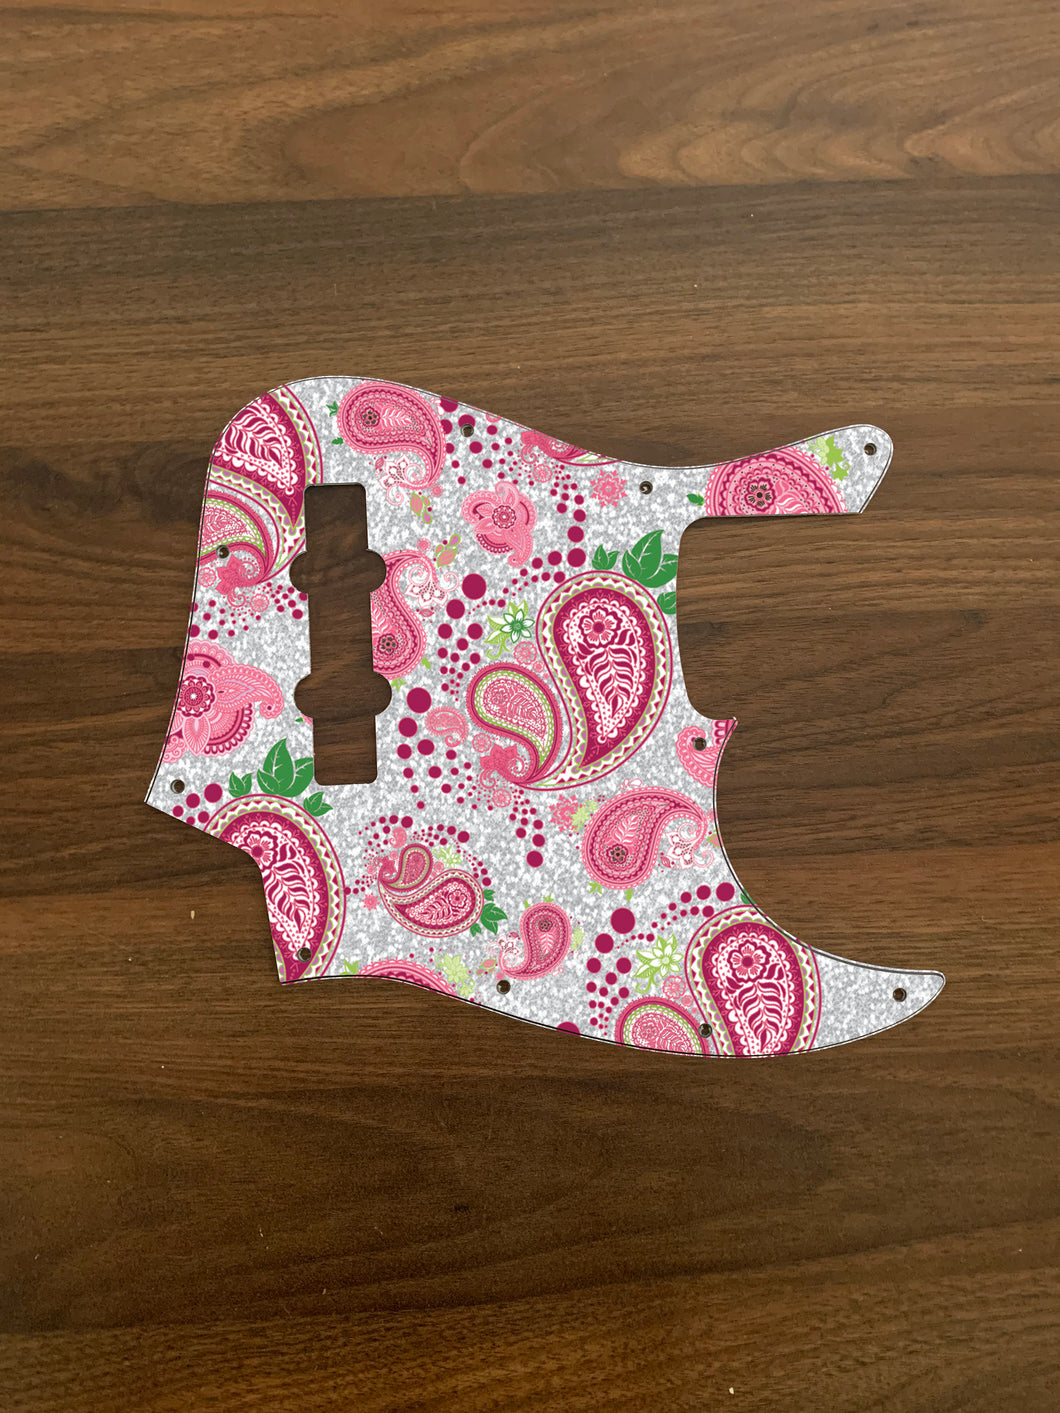 Pink and Silver-Paisley Jazz Bass Pickguard by Carmedon